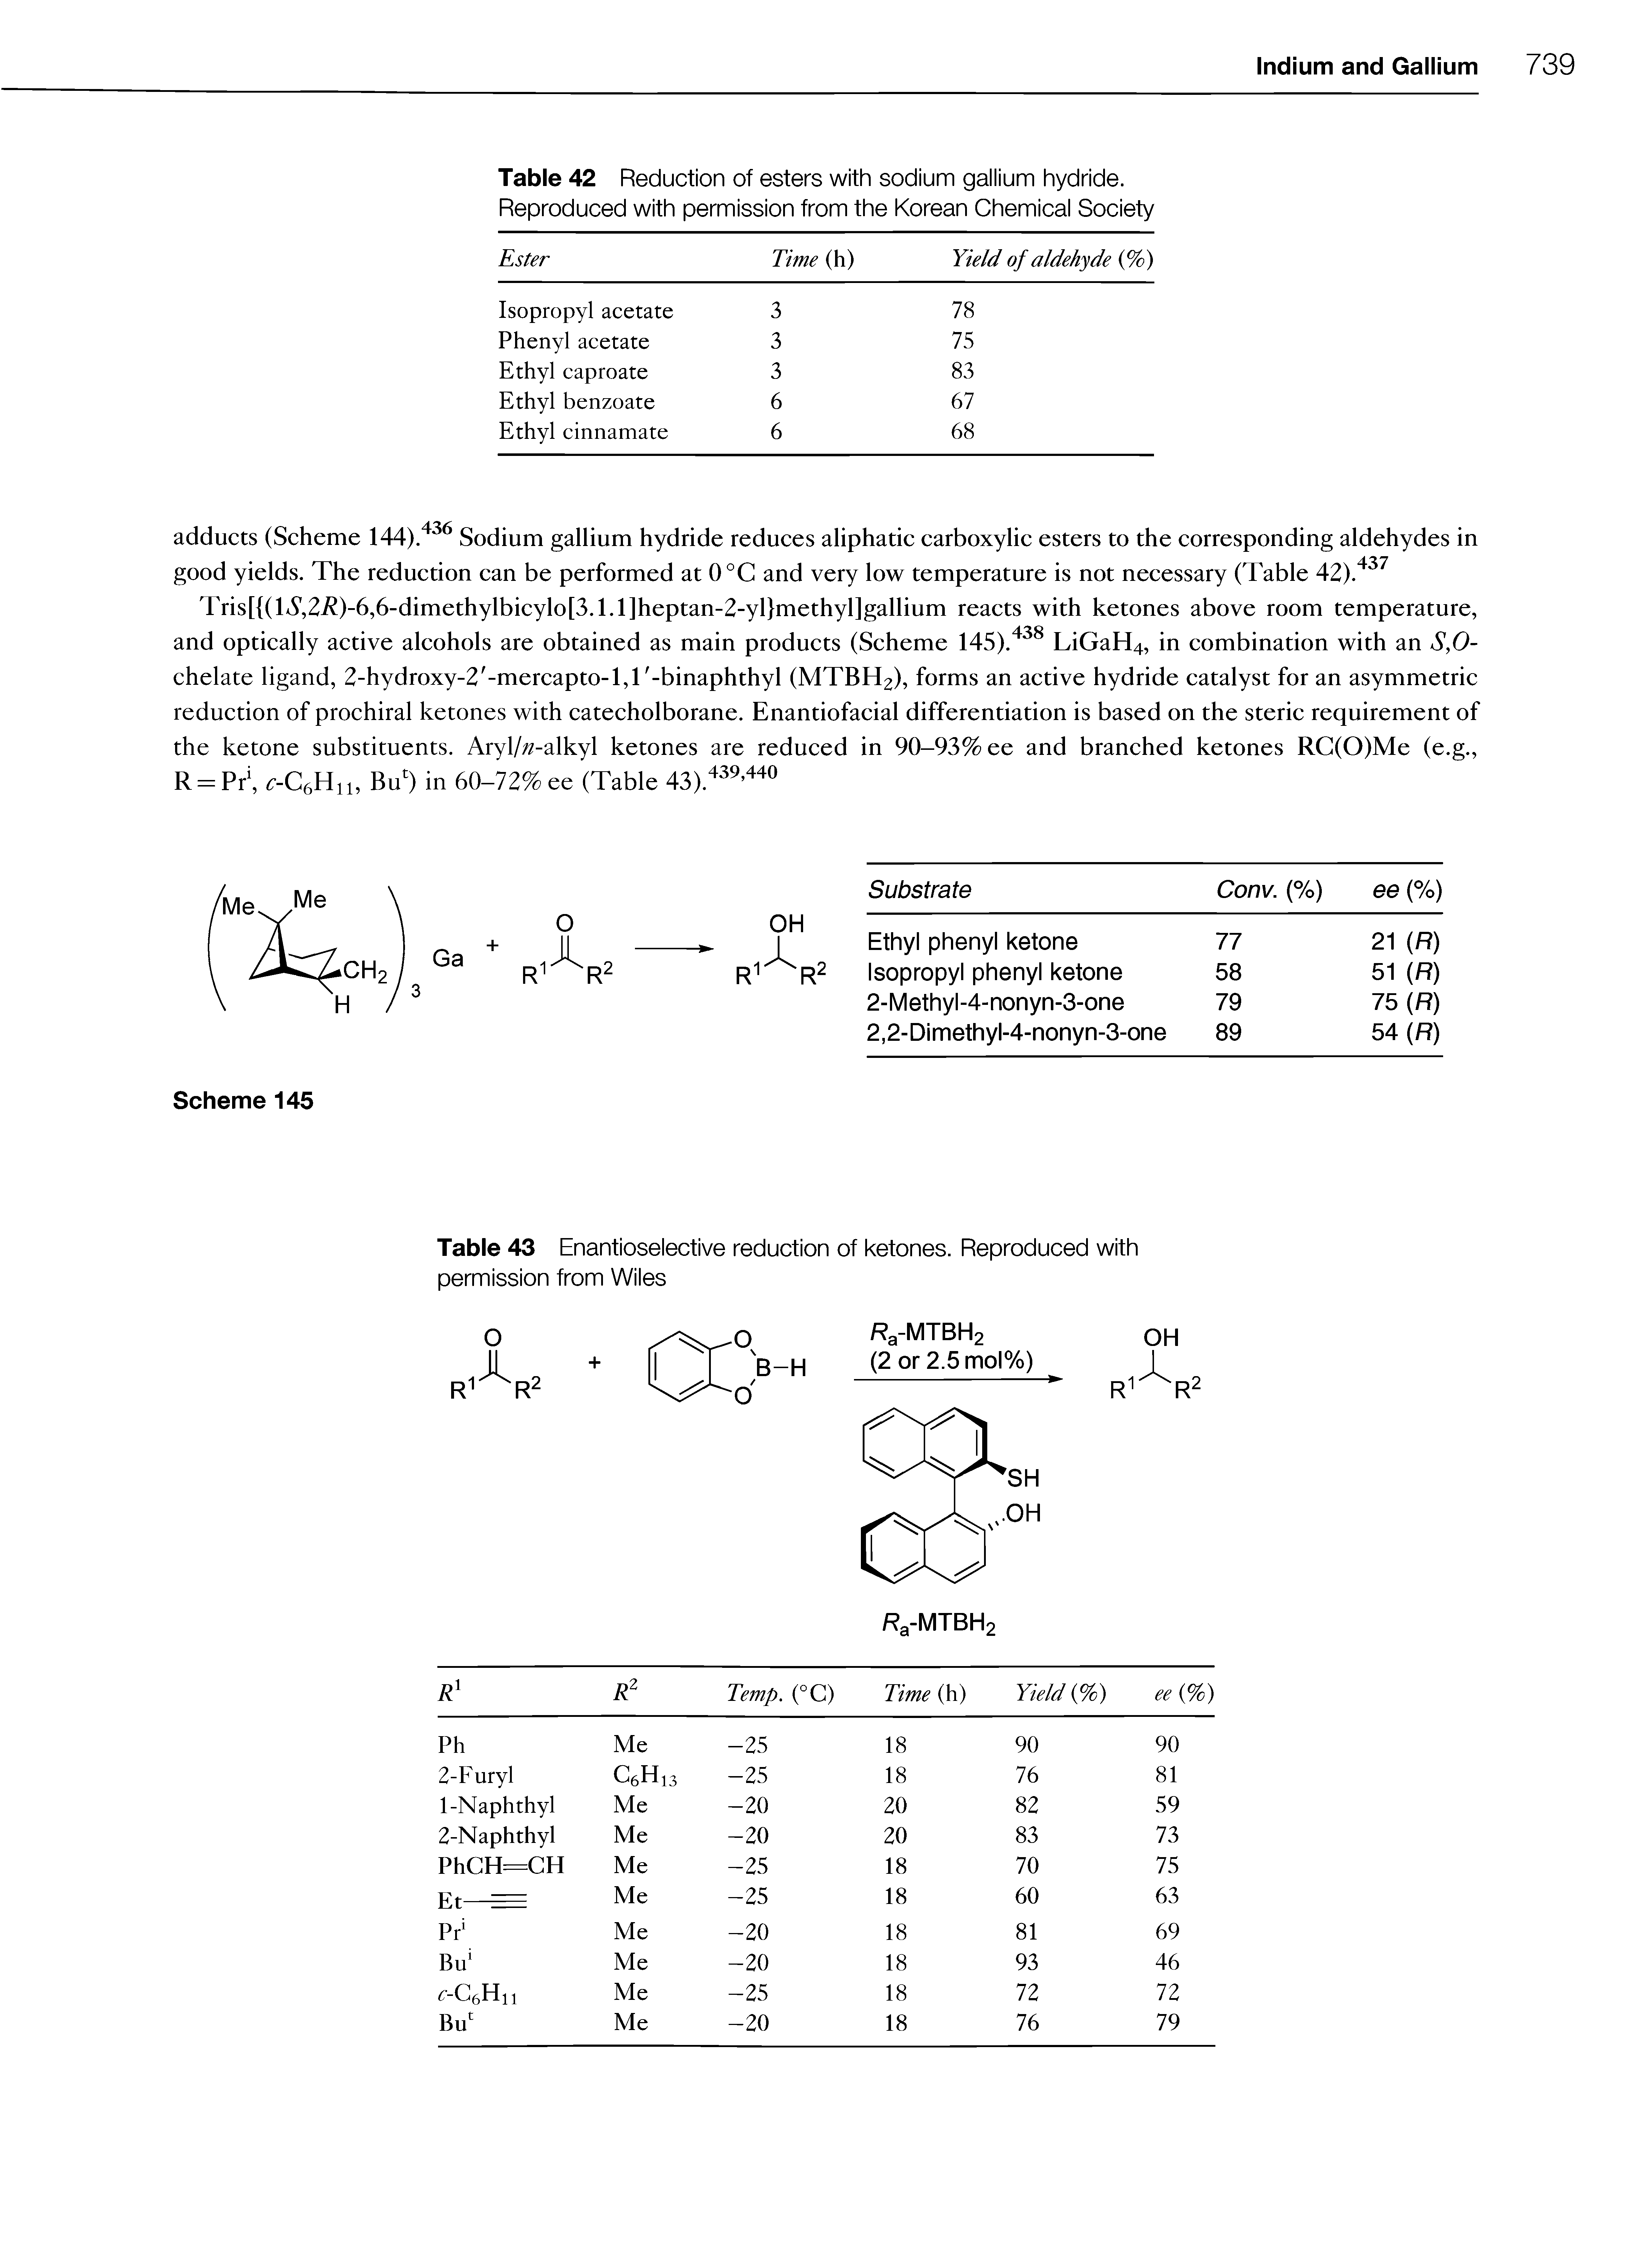 Table 42 Reduction of esters with sodium gallium hydride. Reproduced with permission from the Korean Chemical Society...